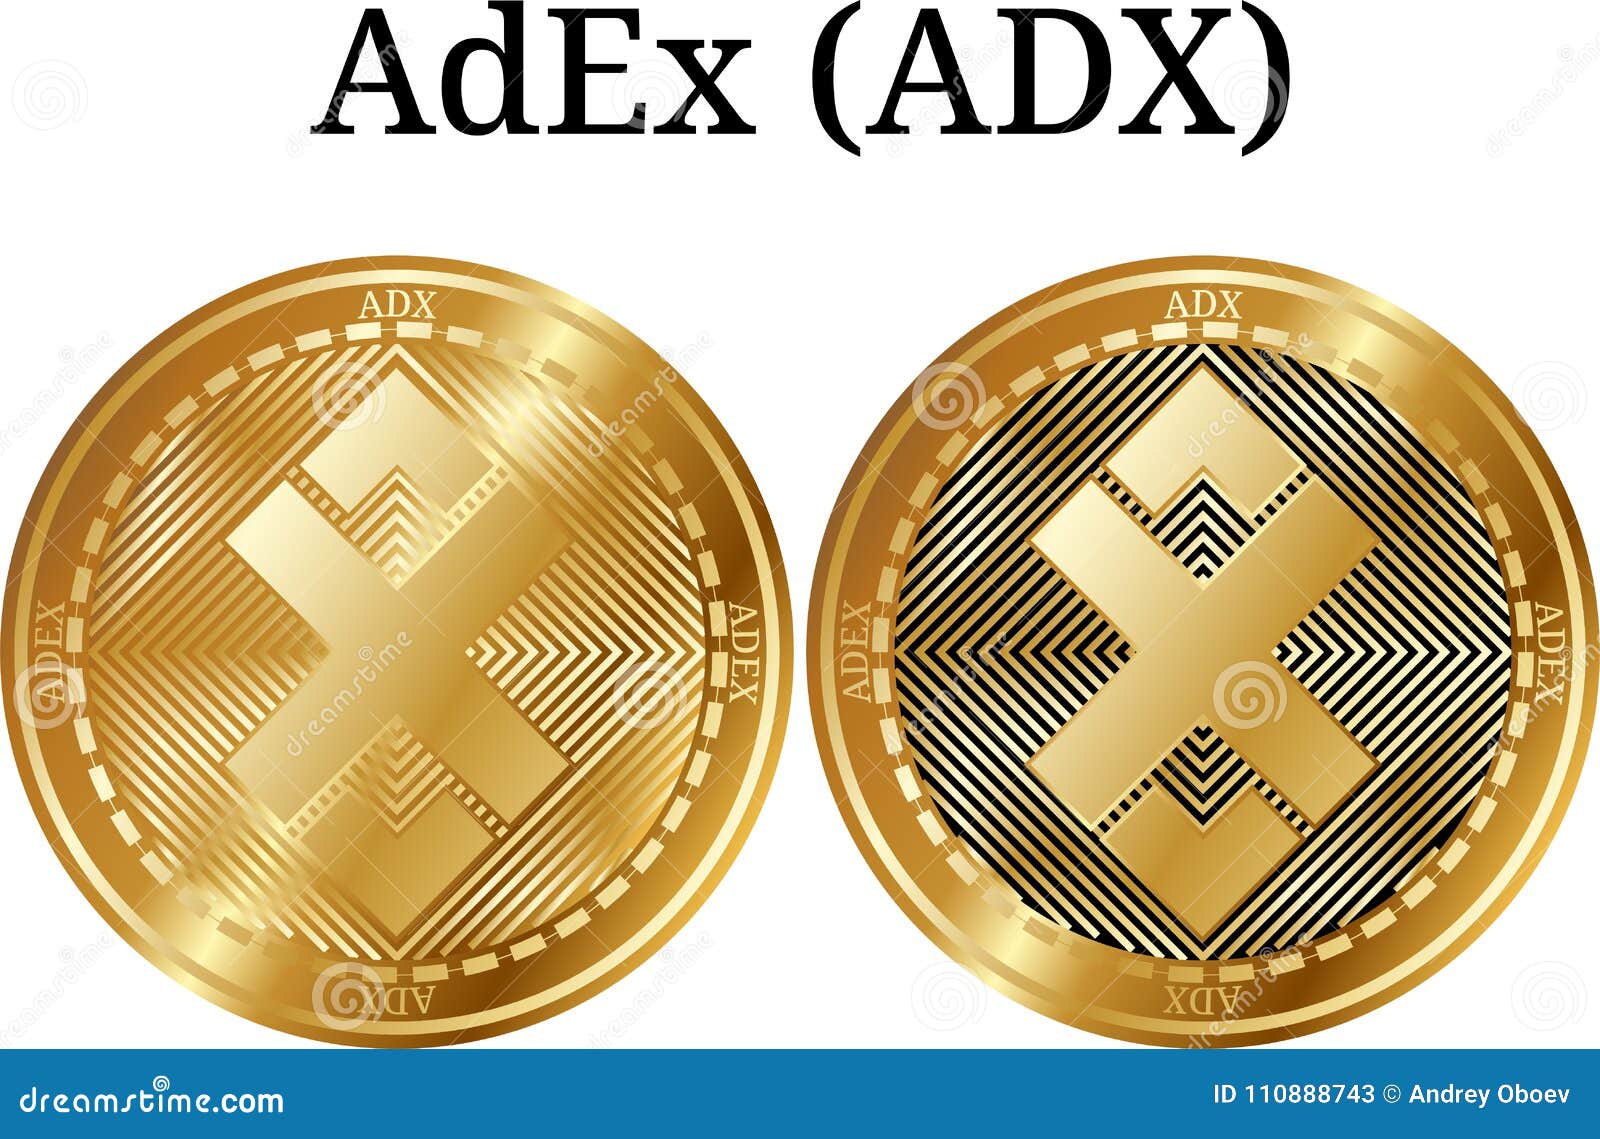 Adx cryptocurrency will banks buy bitcoin